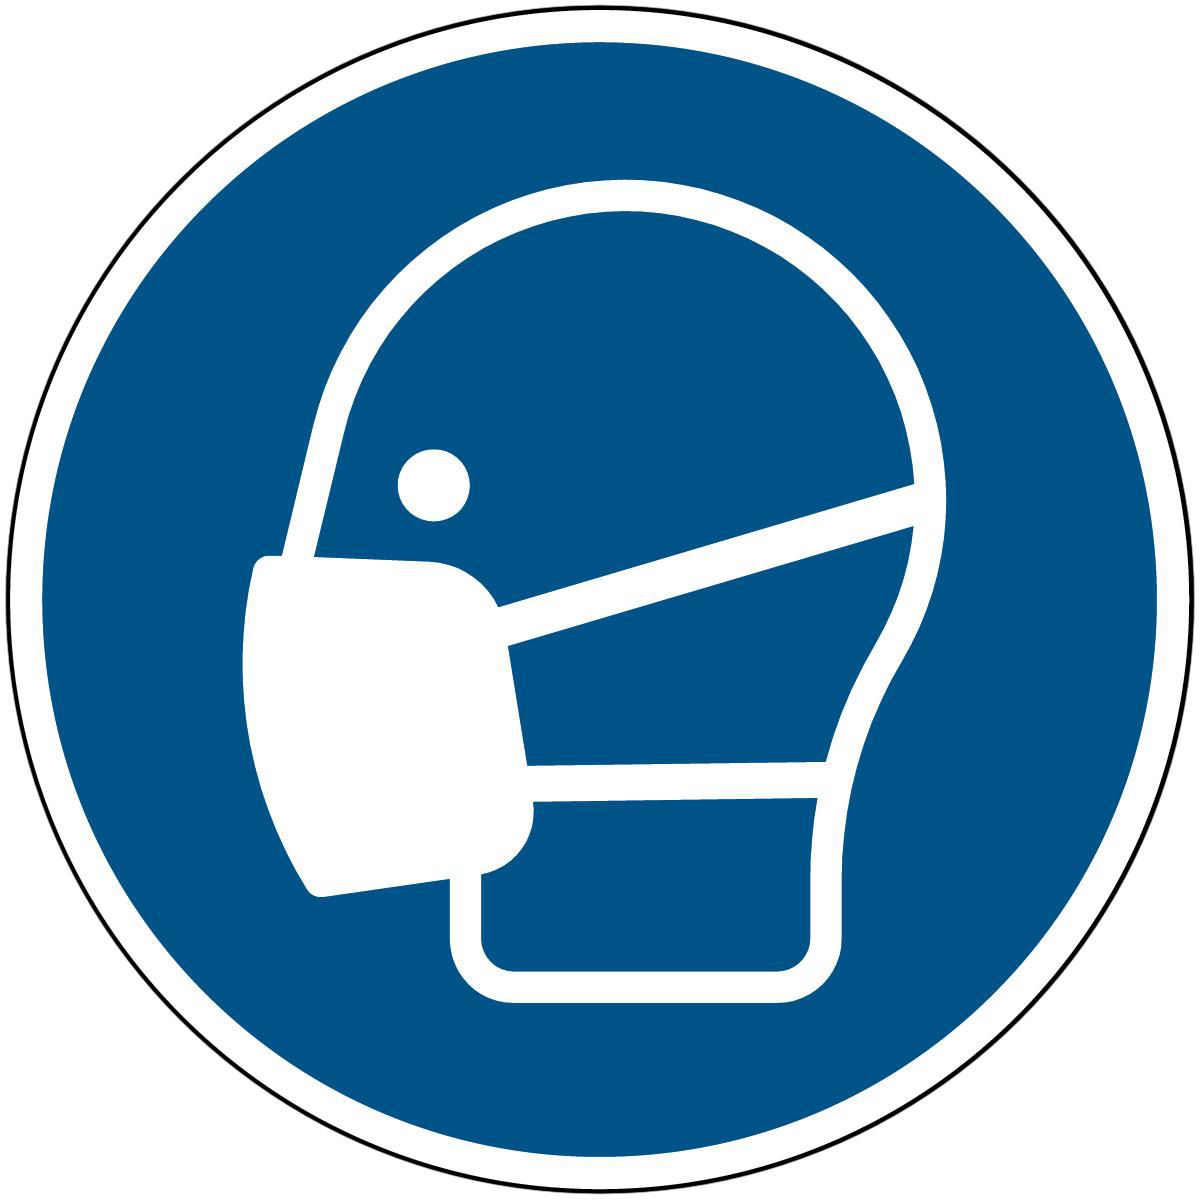 Brady PIC M016-DIA 100-PP-CRD1 W128410886 ISO Safety Sign - Wear a mask 